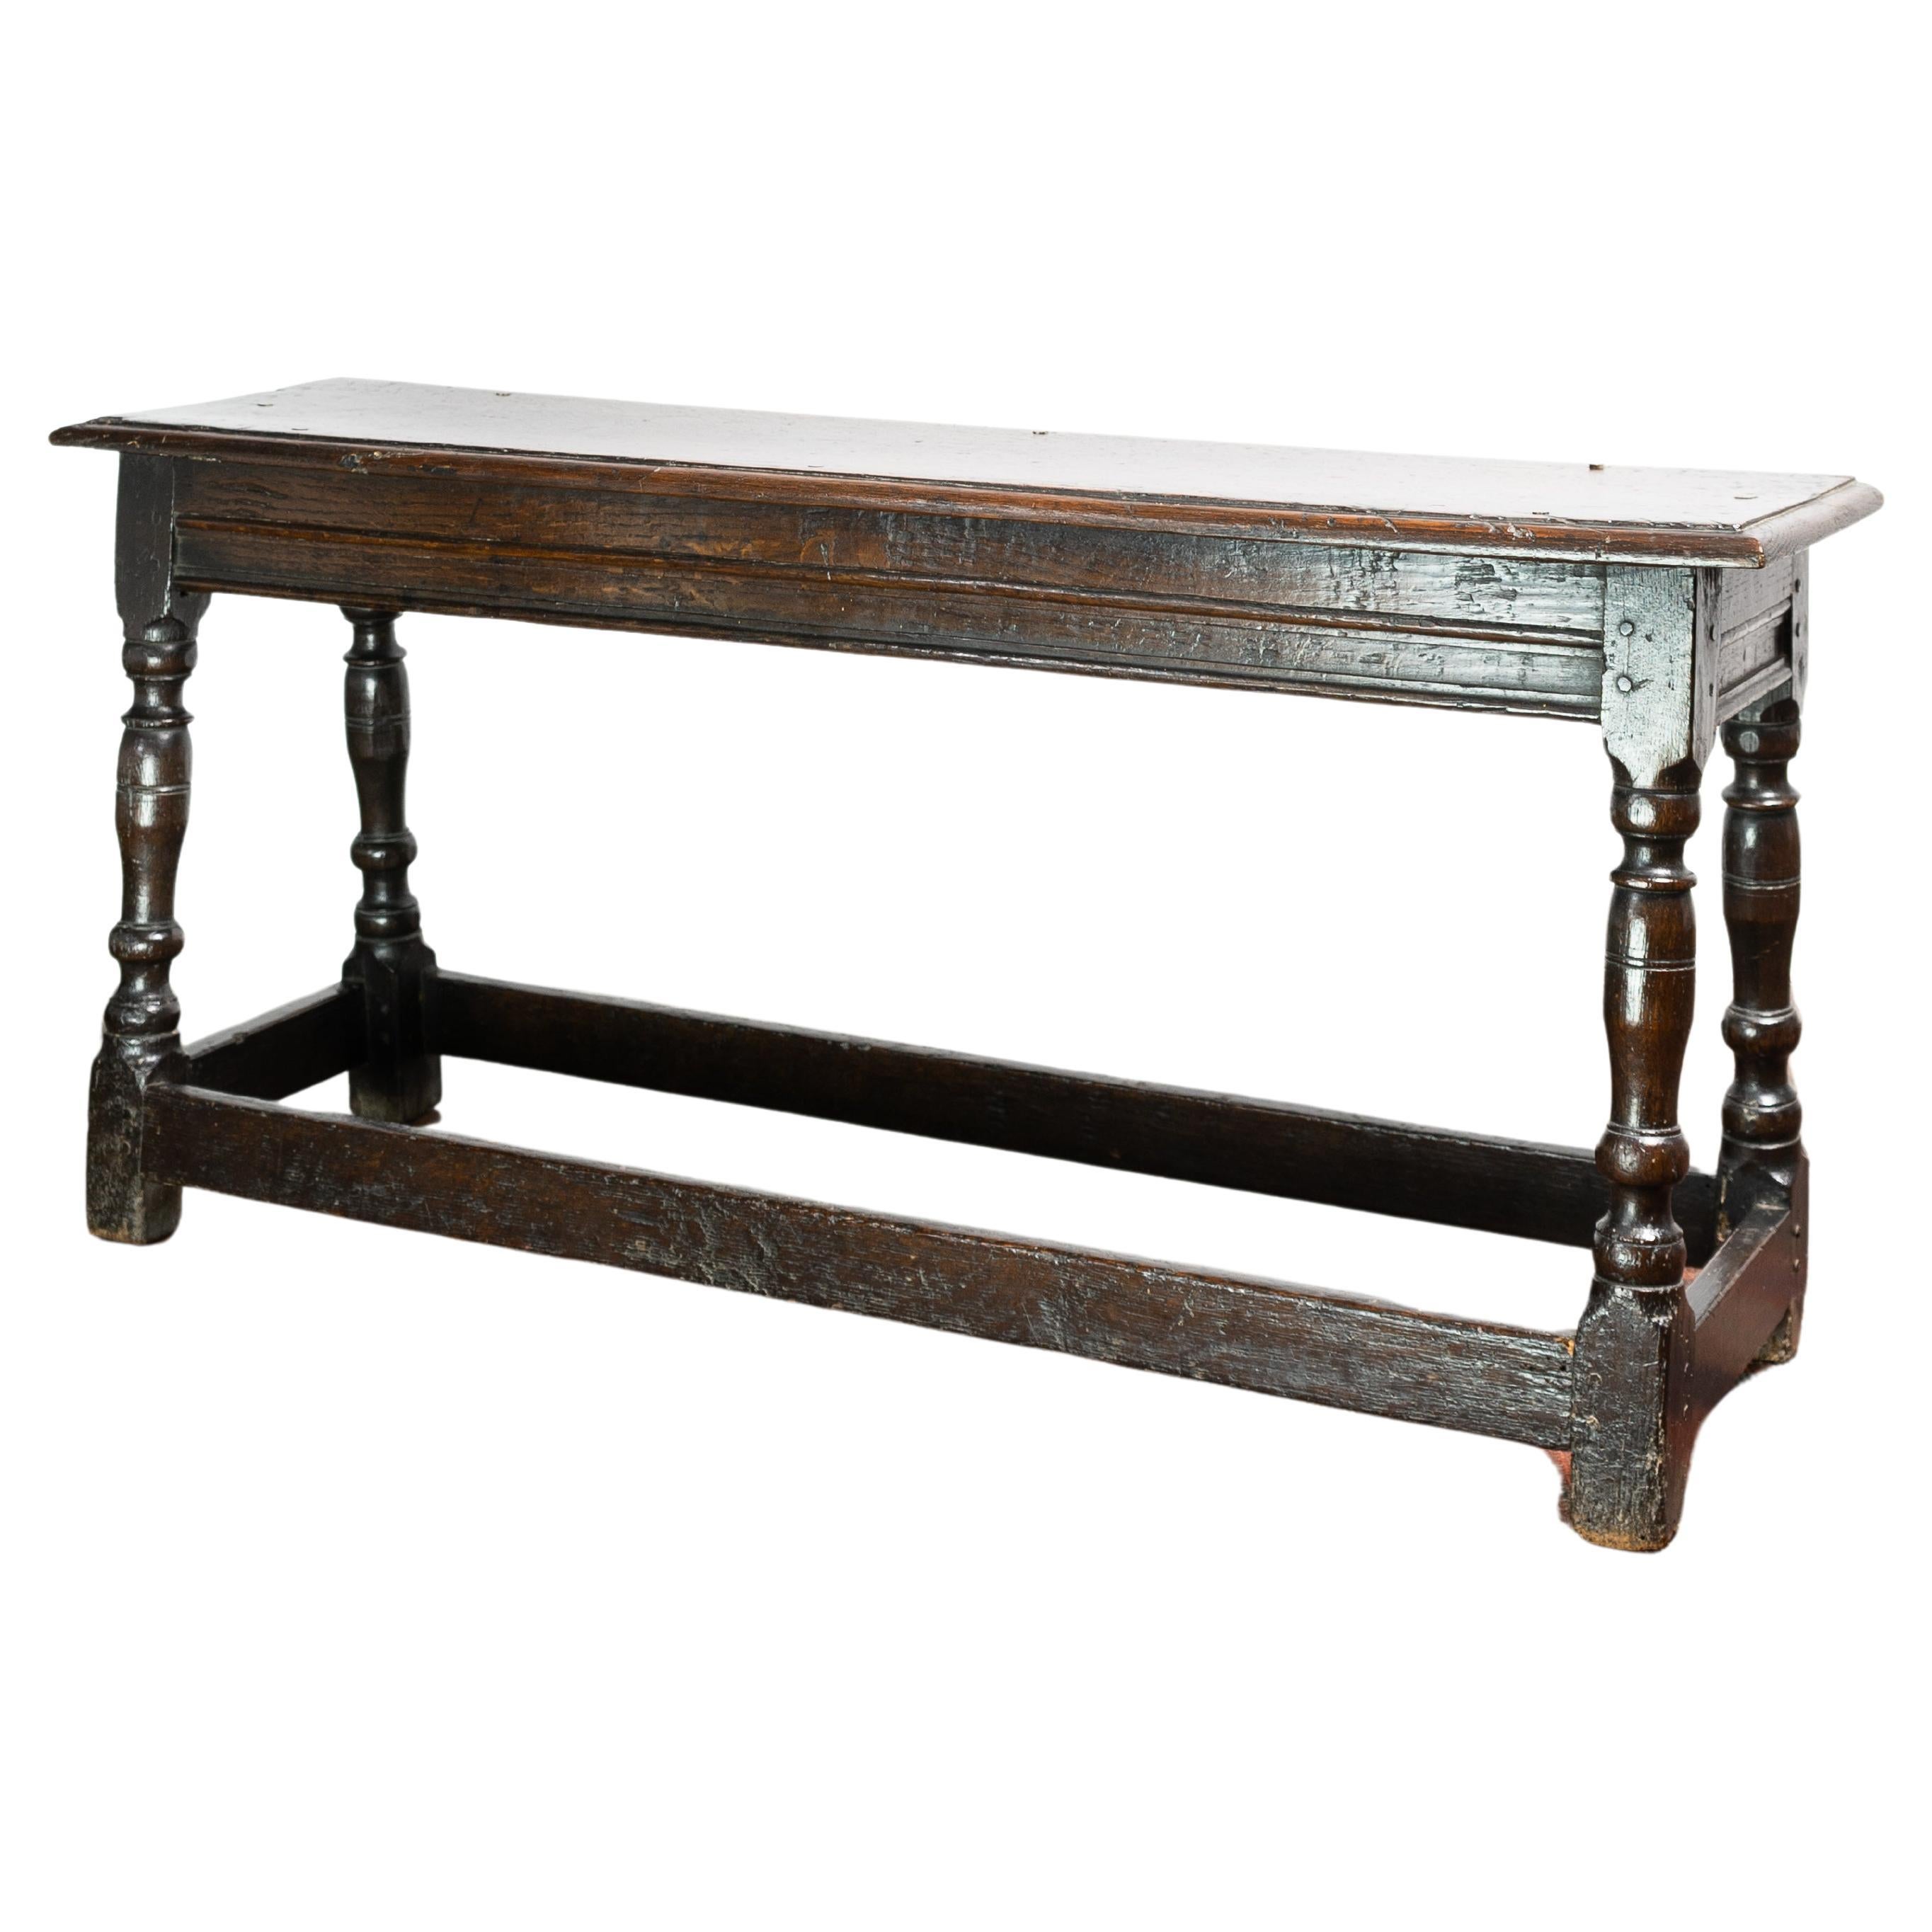 17th Century, James I Joined Oak Bench, England, Circa 1603 - 1625 For Sale